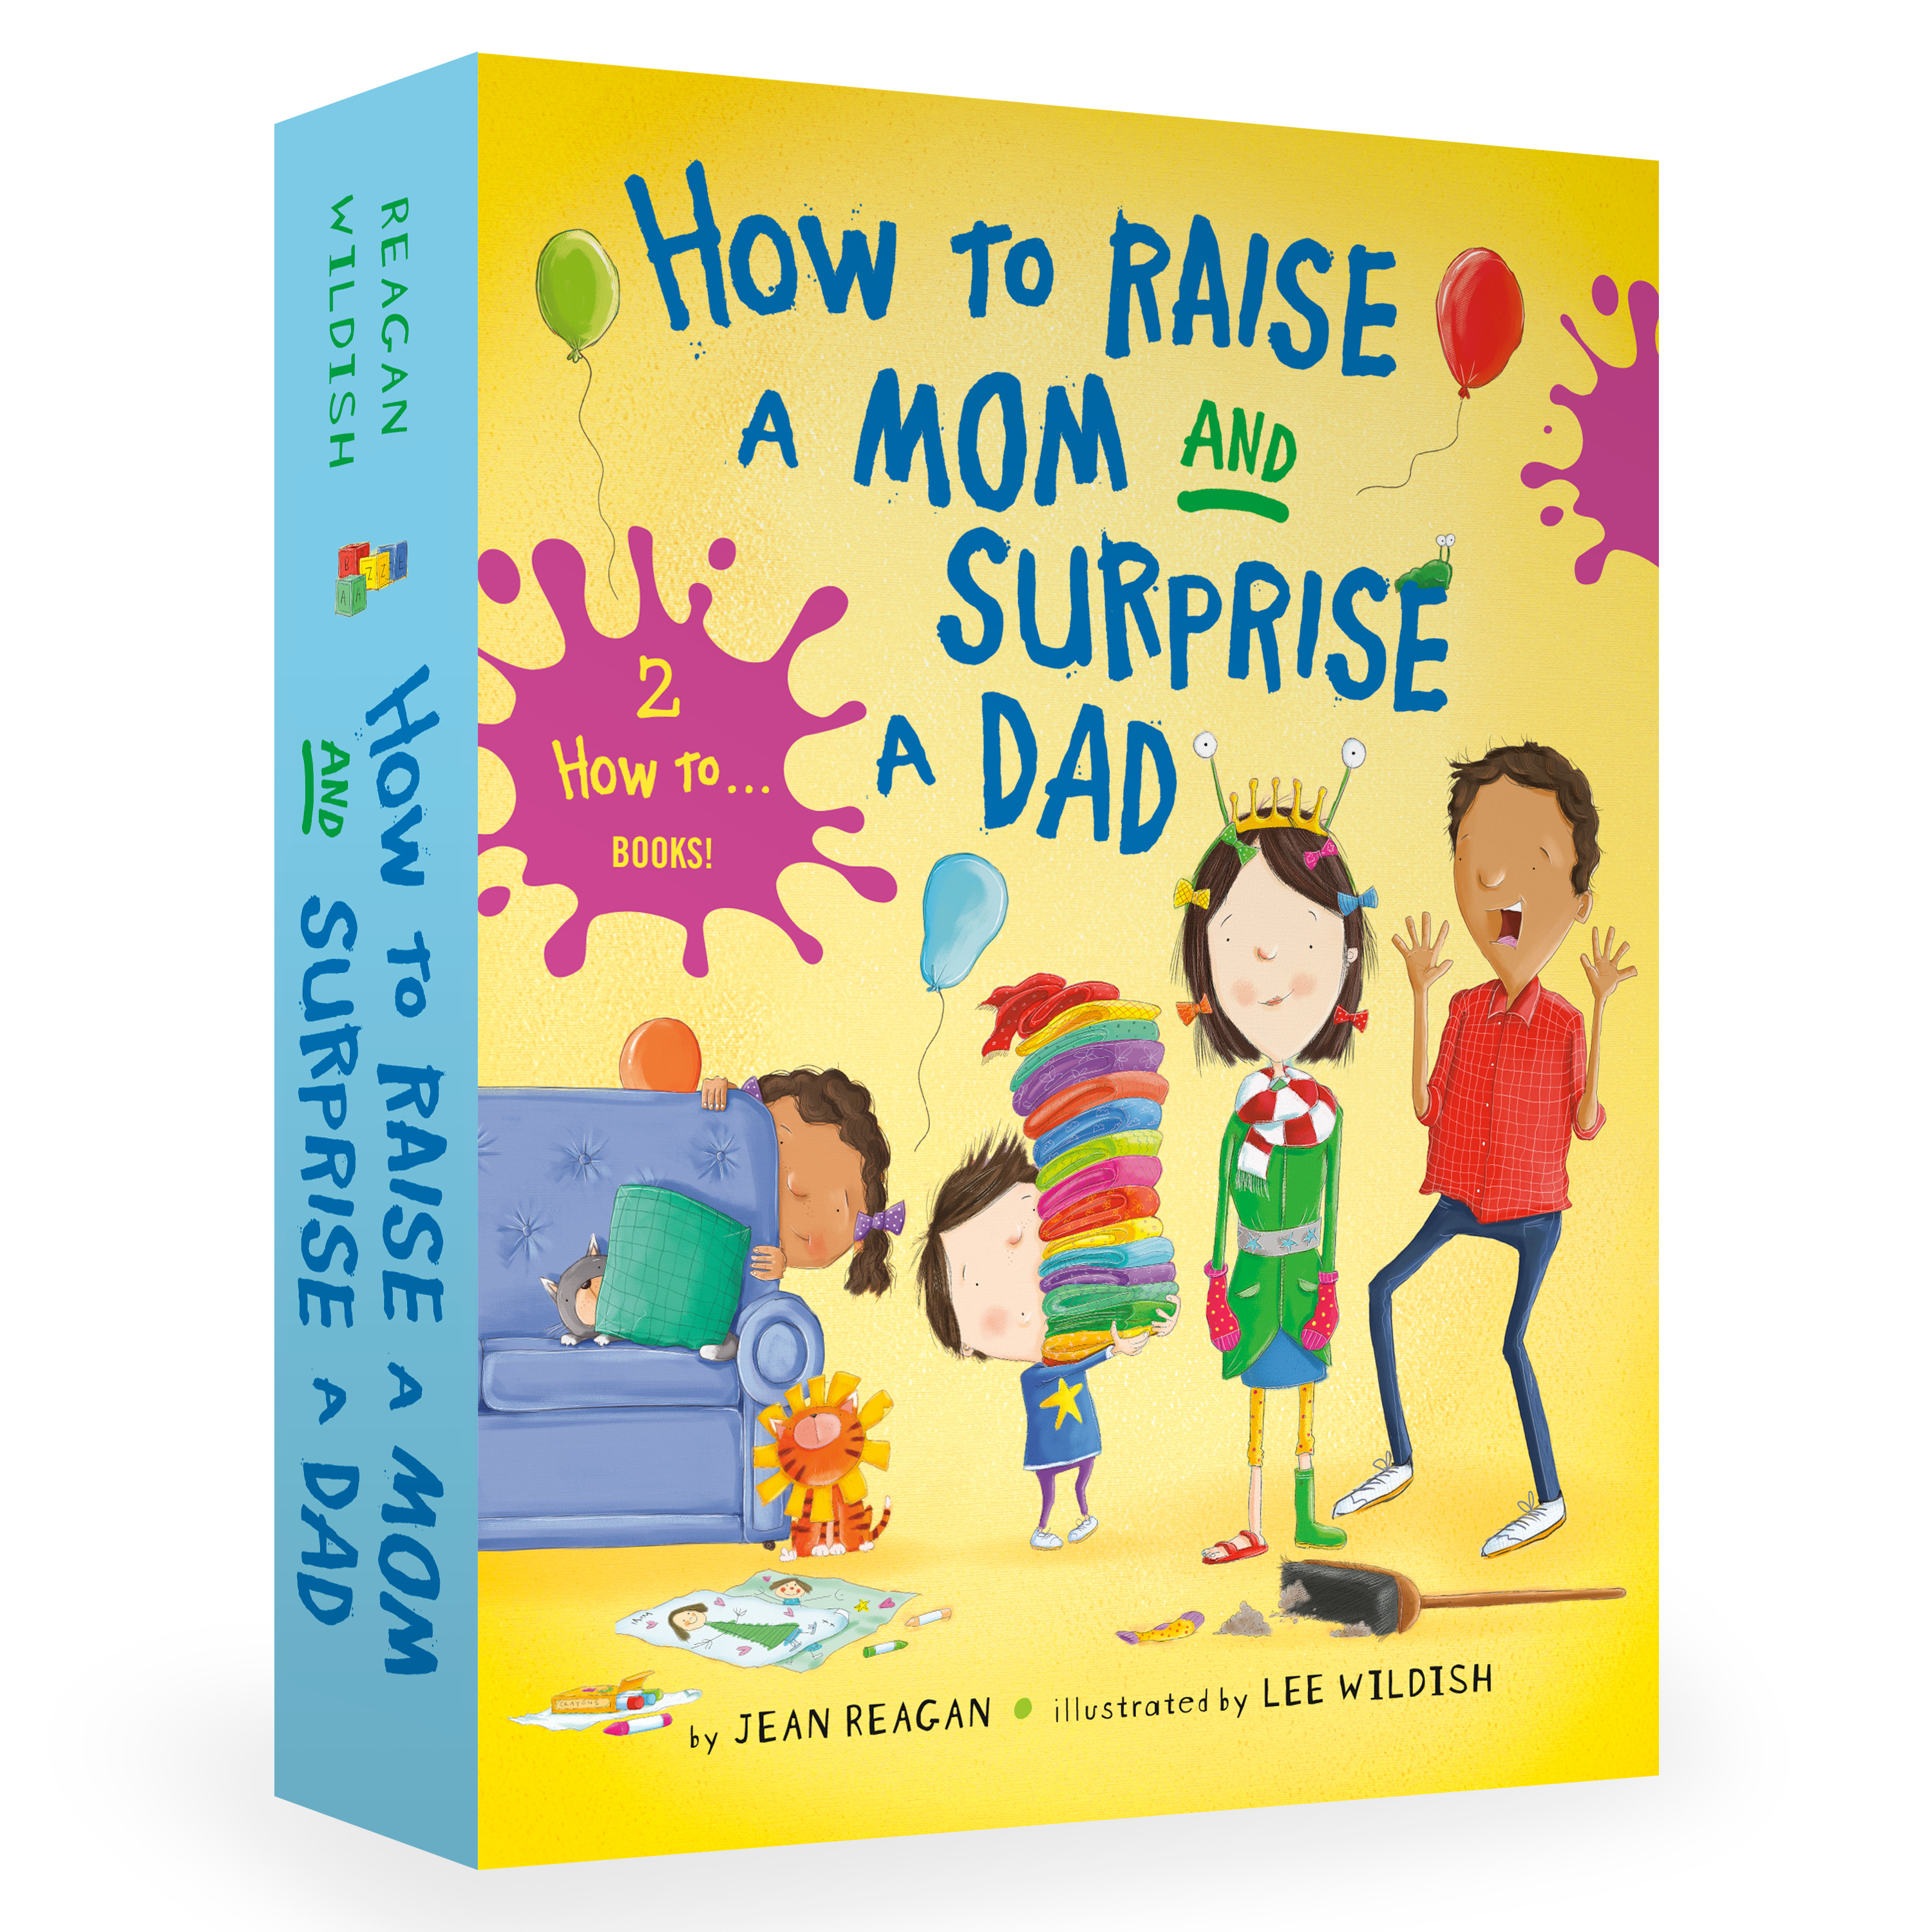 How to Raise a Mom and Surprise a Dad Board Book Boxed Set | Reagan, Jean (Auteur) | Wildish, Lee (Illustrateur)